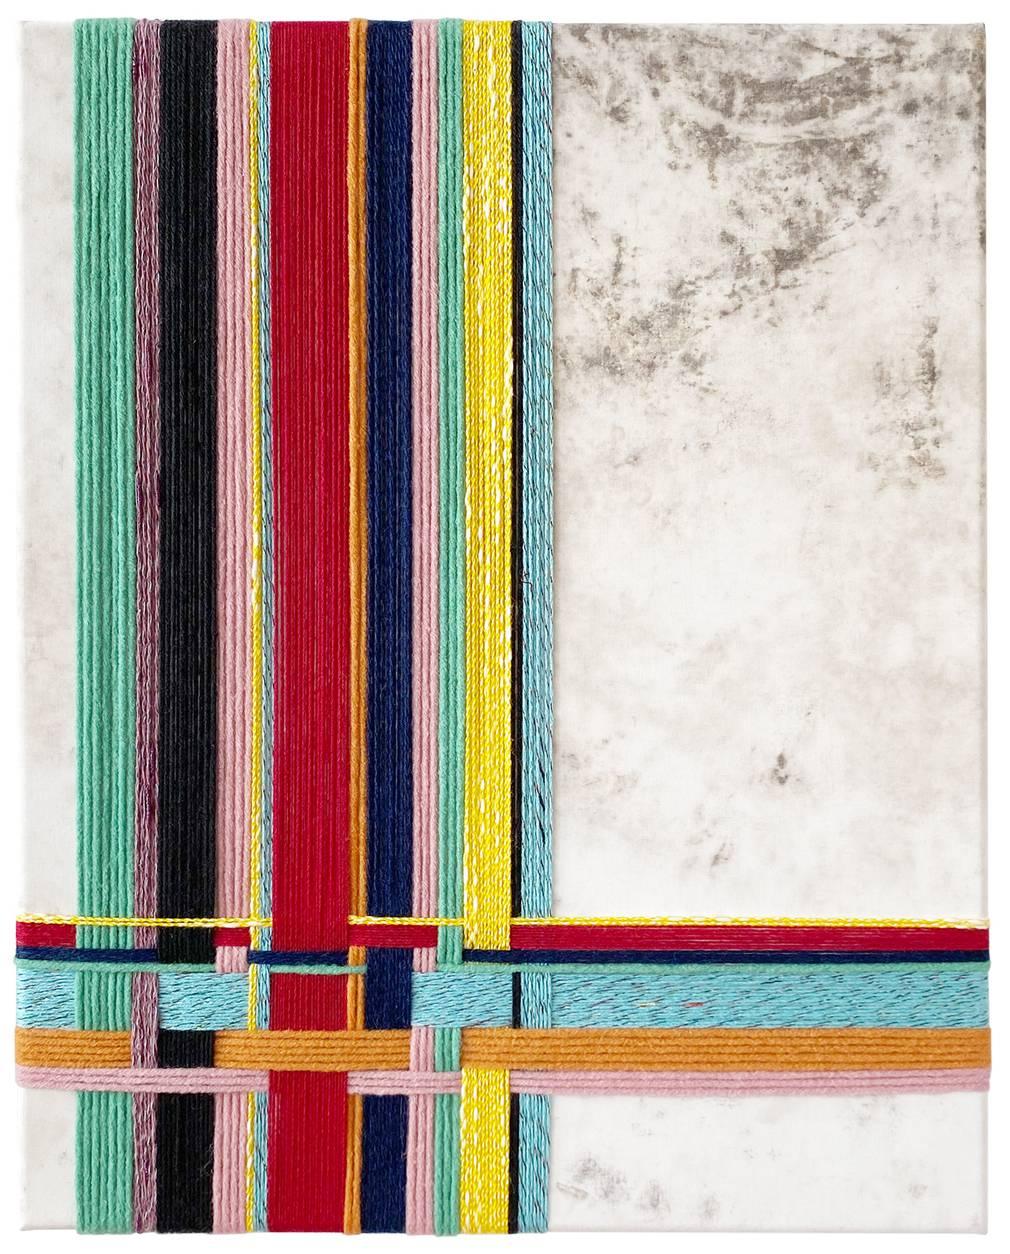 'Paternoster', bed sheet, mixed media, wool, canvas, abstract, contemporary, art - Mixed Media Art by Meike Legler